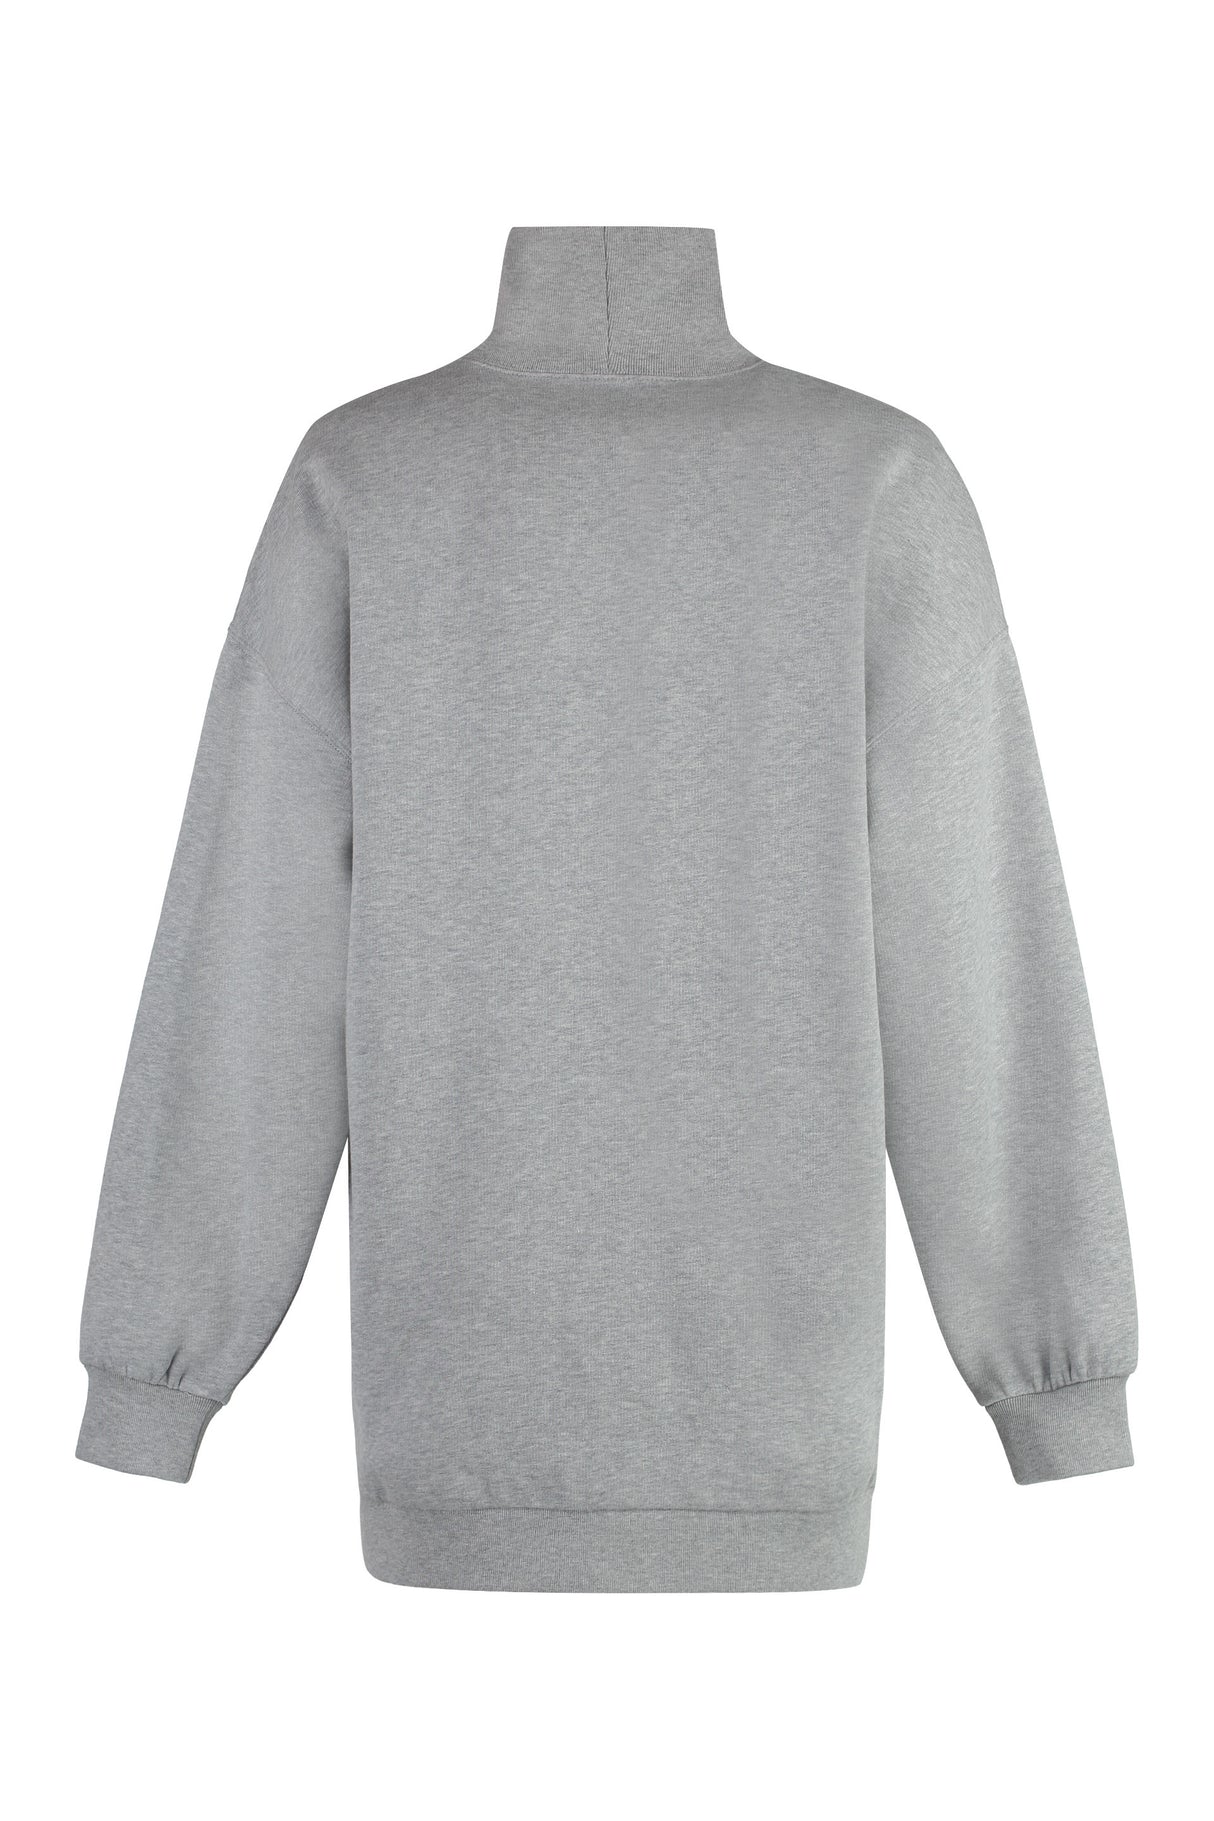 GUCCI Stand Up Collar Grey Sweatshirt for Women - Spring 2024